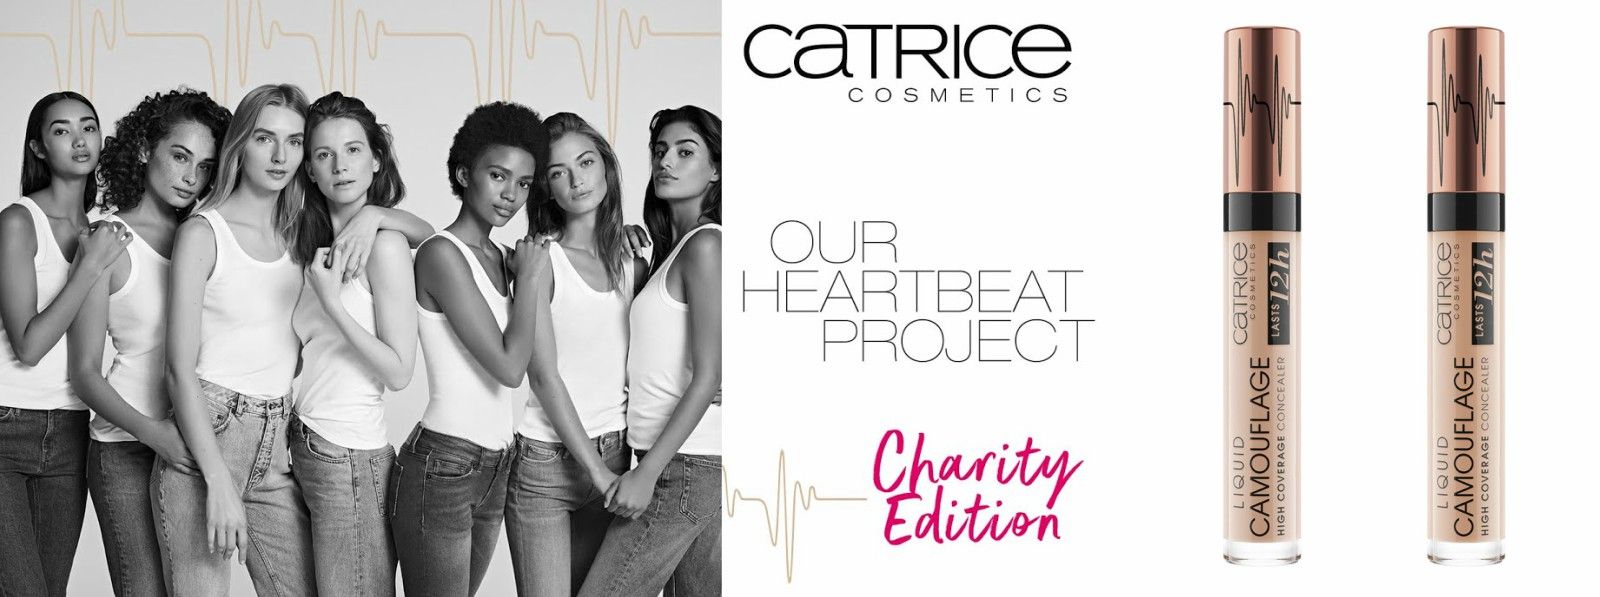 images easyblog articles 7813 catrice charity edition 30acfe66